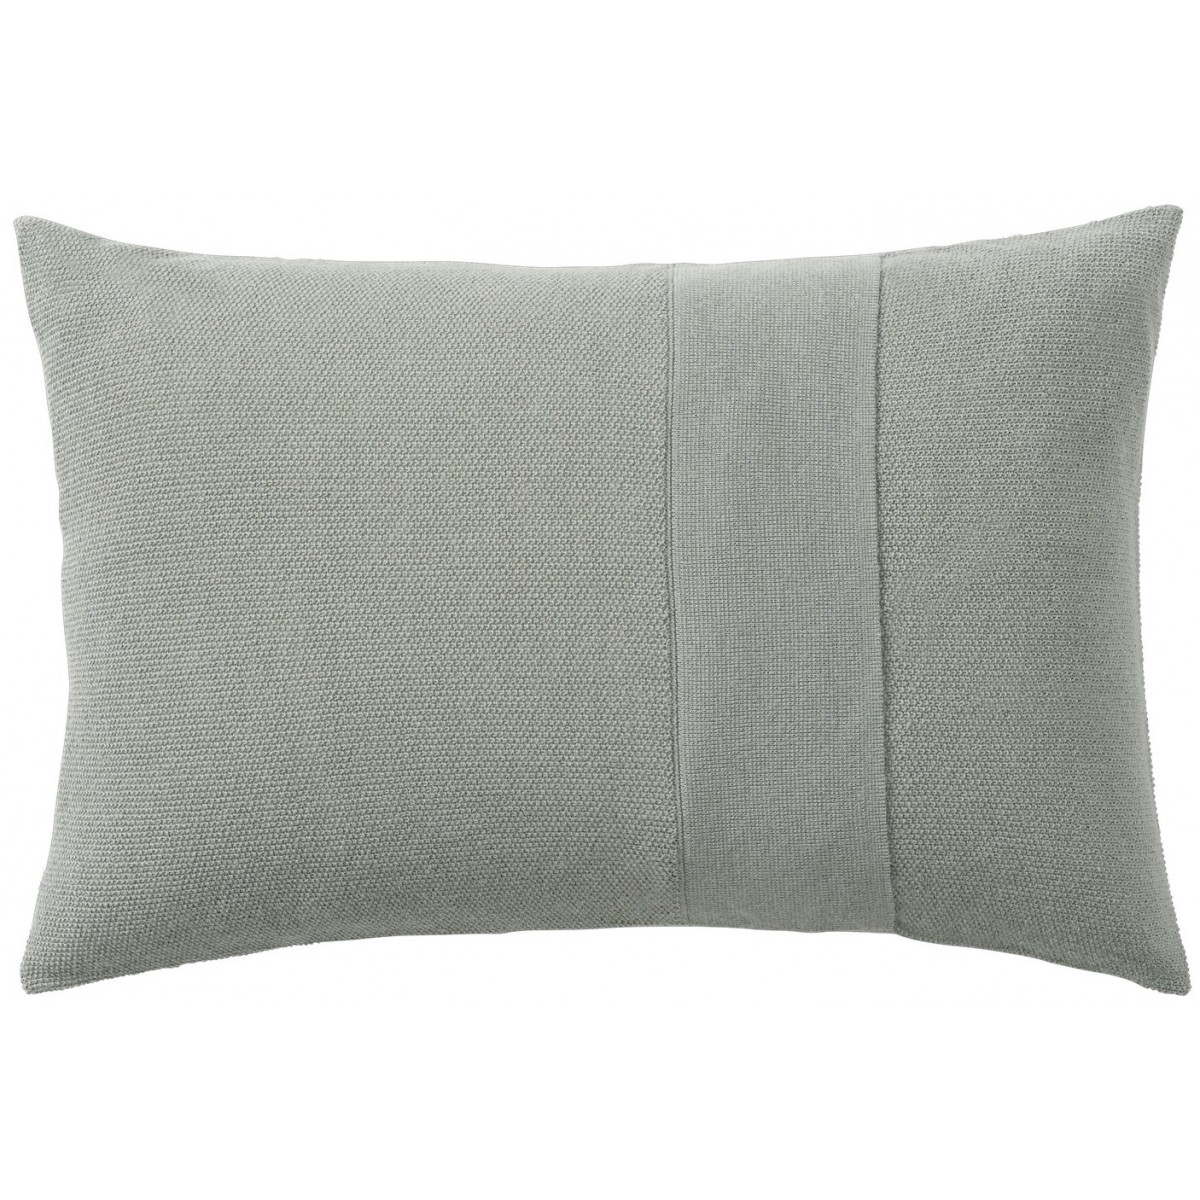 SOLD OUT Layer cushion - 60 x 40 cm - sage green